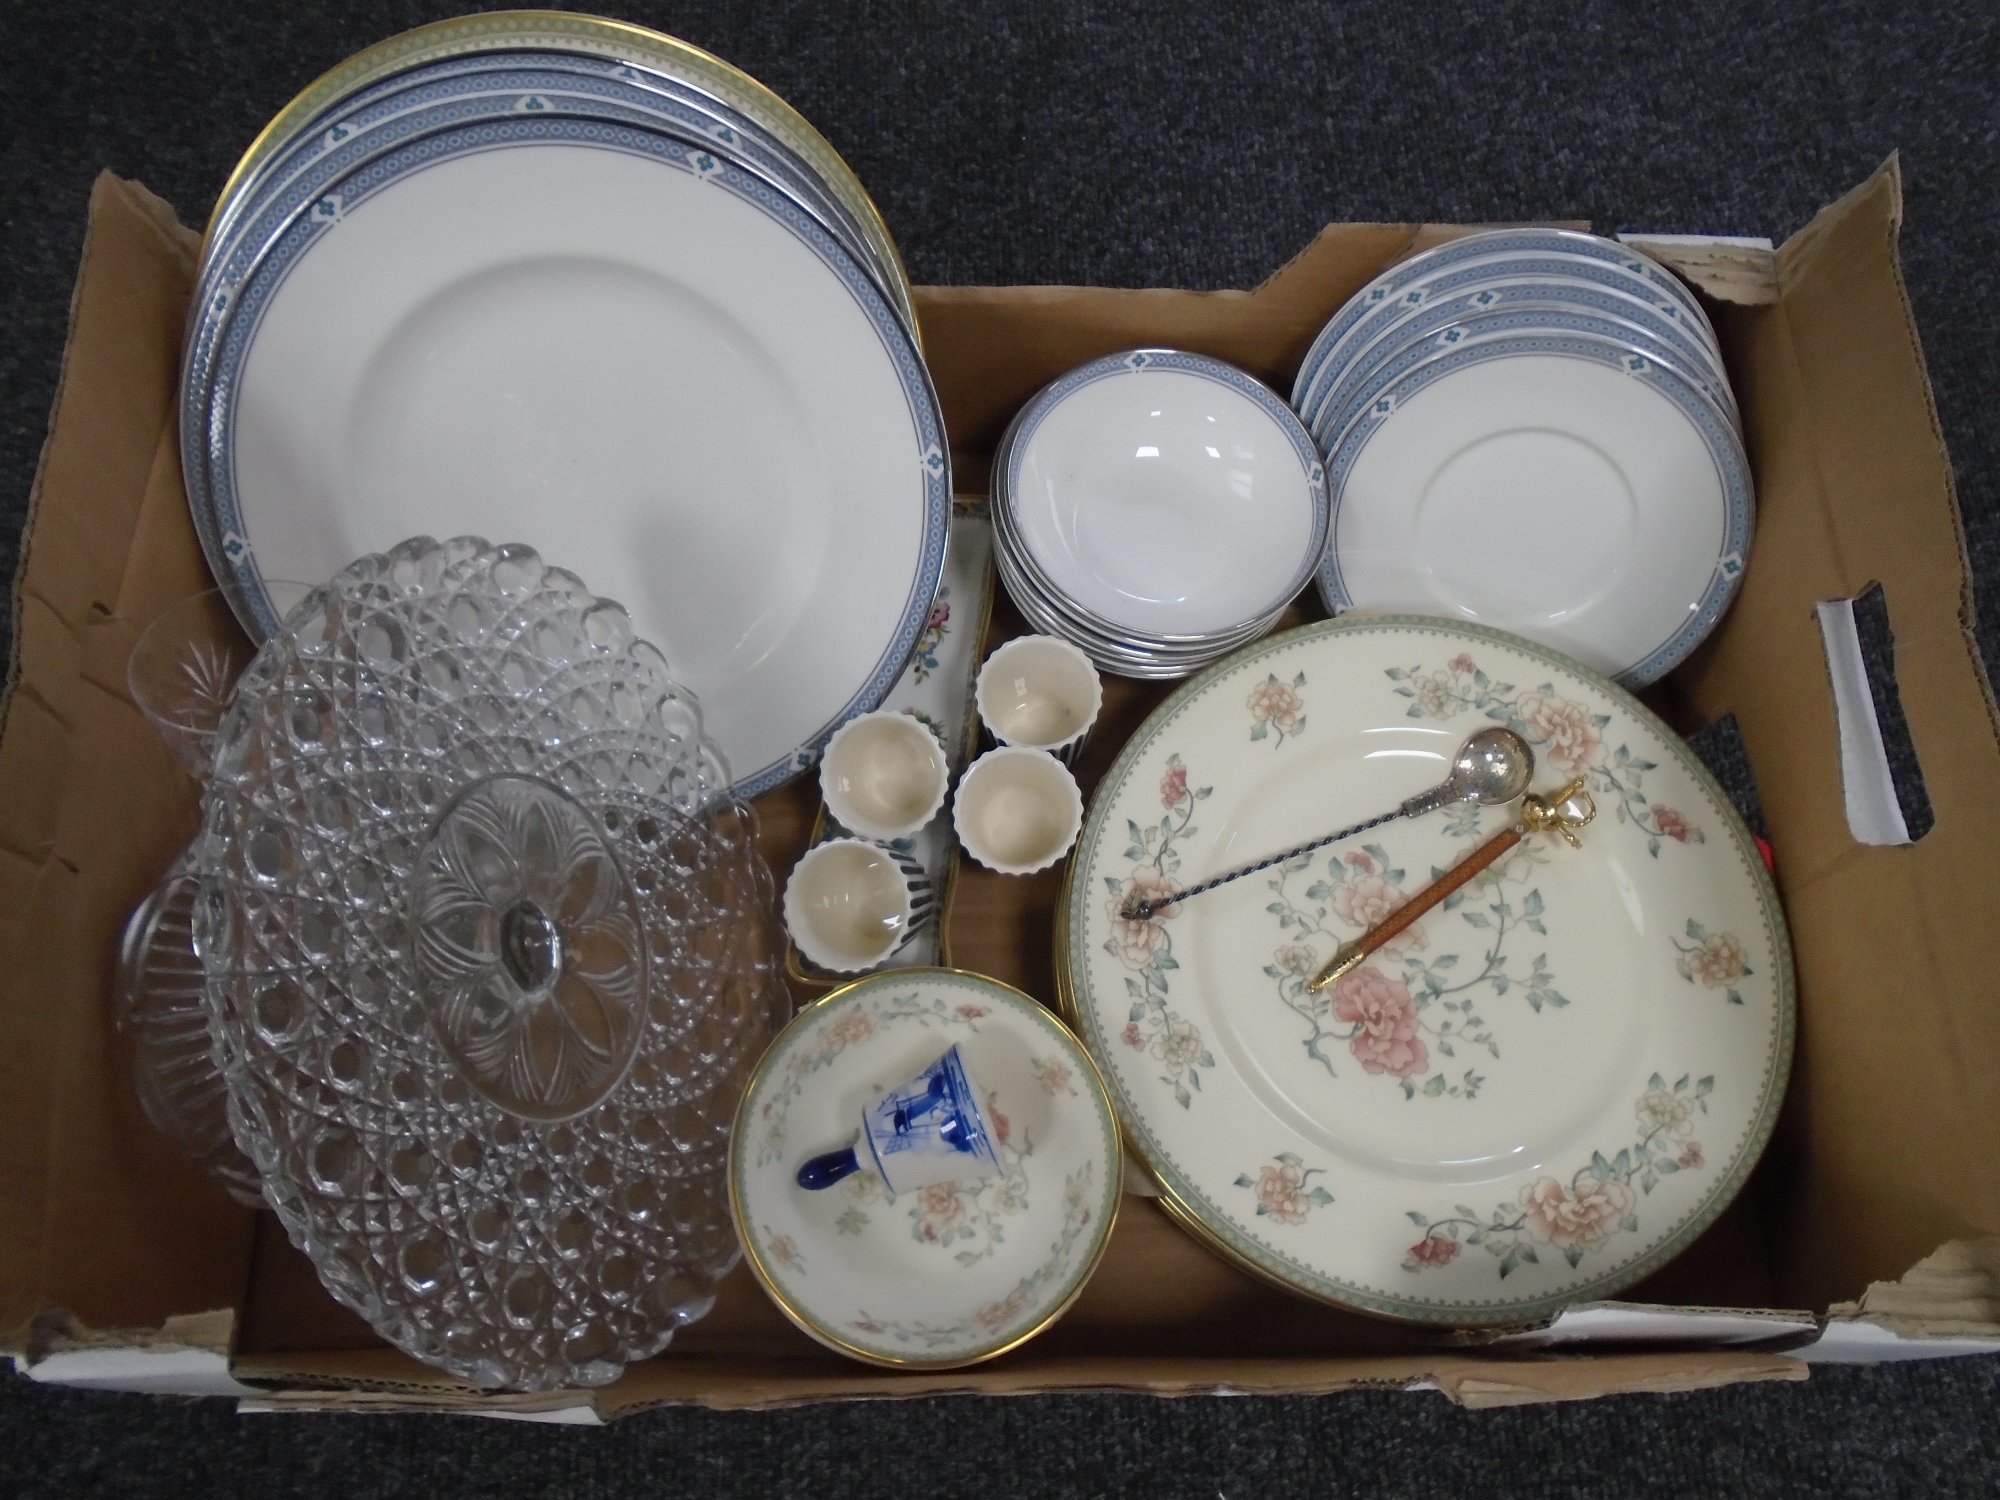 A box containing Royal Doulton Romsey and Minton Jasmine dinnerware, glass comport, caddy spoon etc.